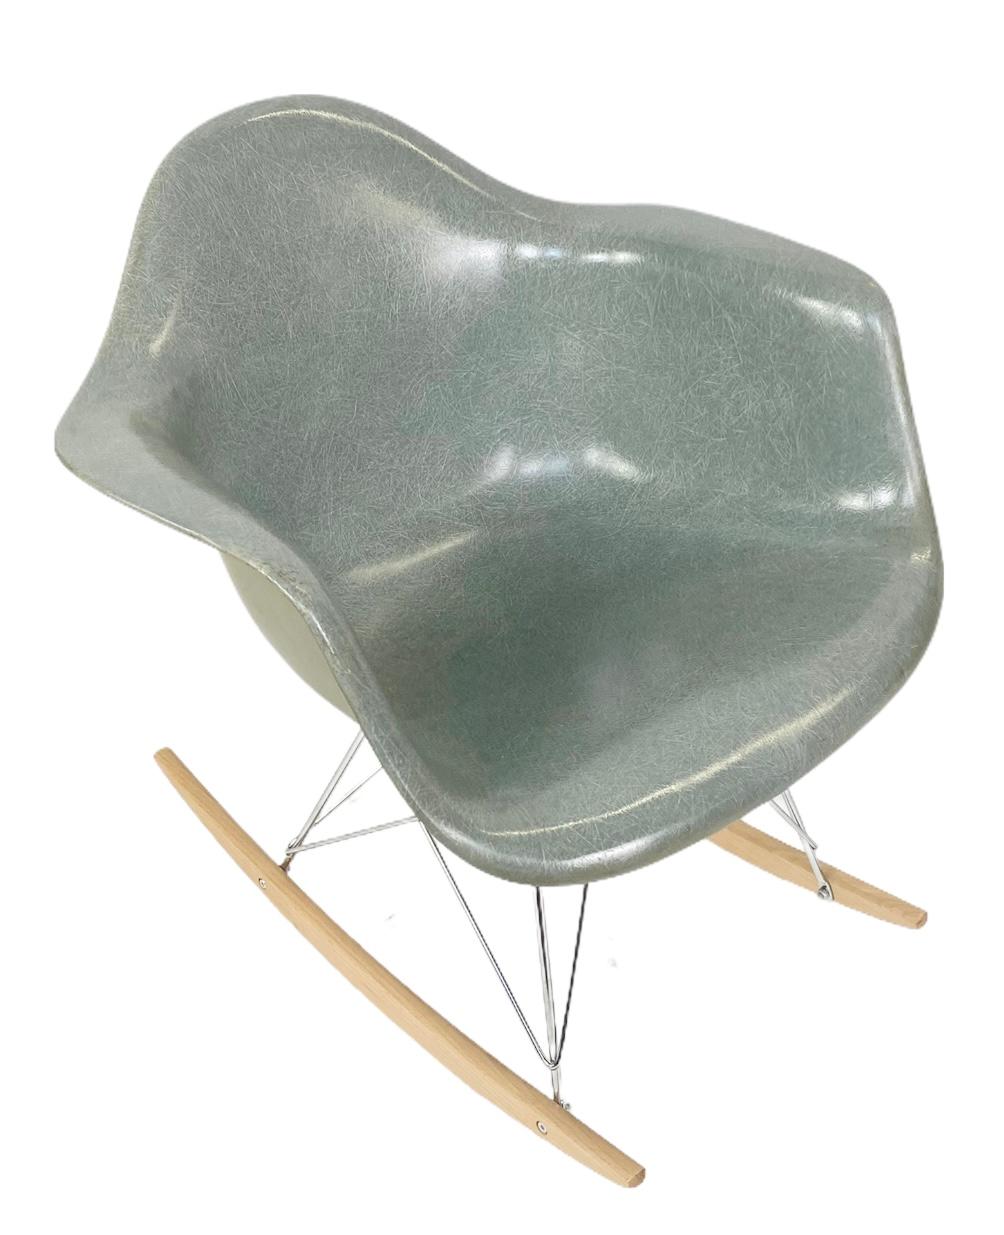 Very early shell, dating to circa 1960. Highly coveted and hard to find Seafoam green. On new rocker base, no cracks to the shell. Normal wear, retains Herman Miller label. Factory coated grey/green back. Original shock mounts intact. Signed and